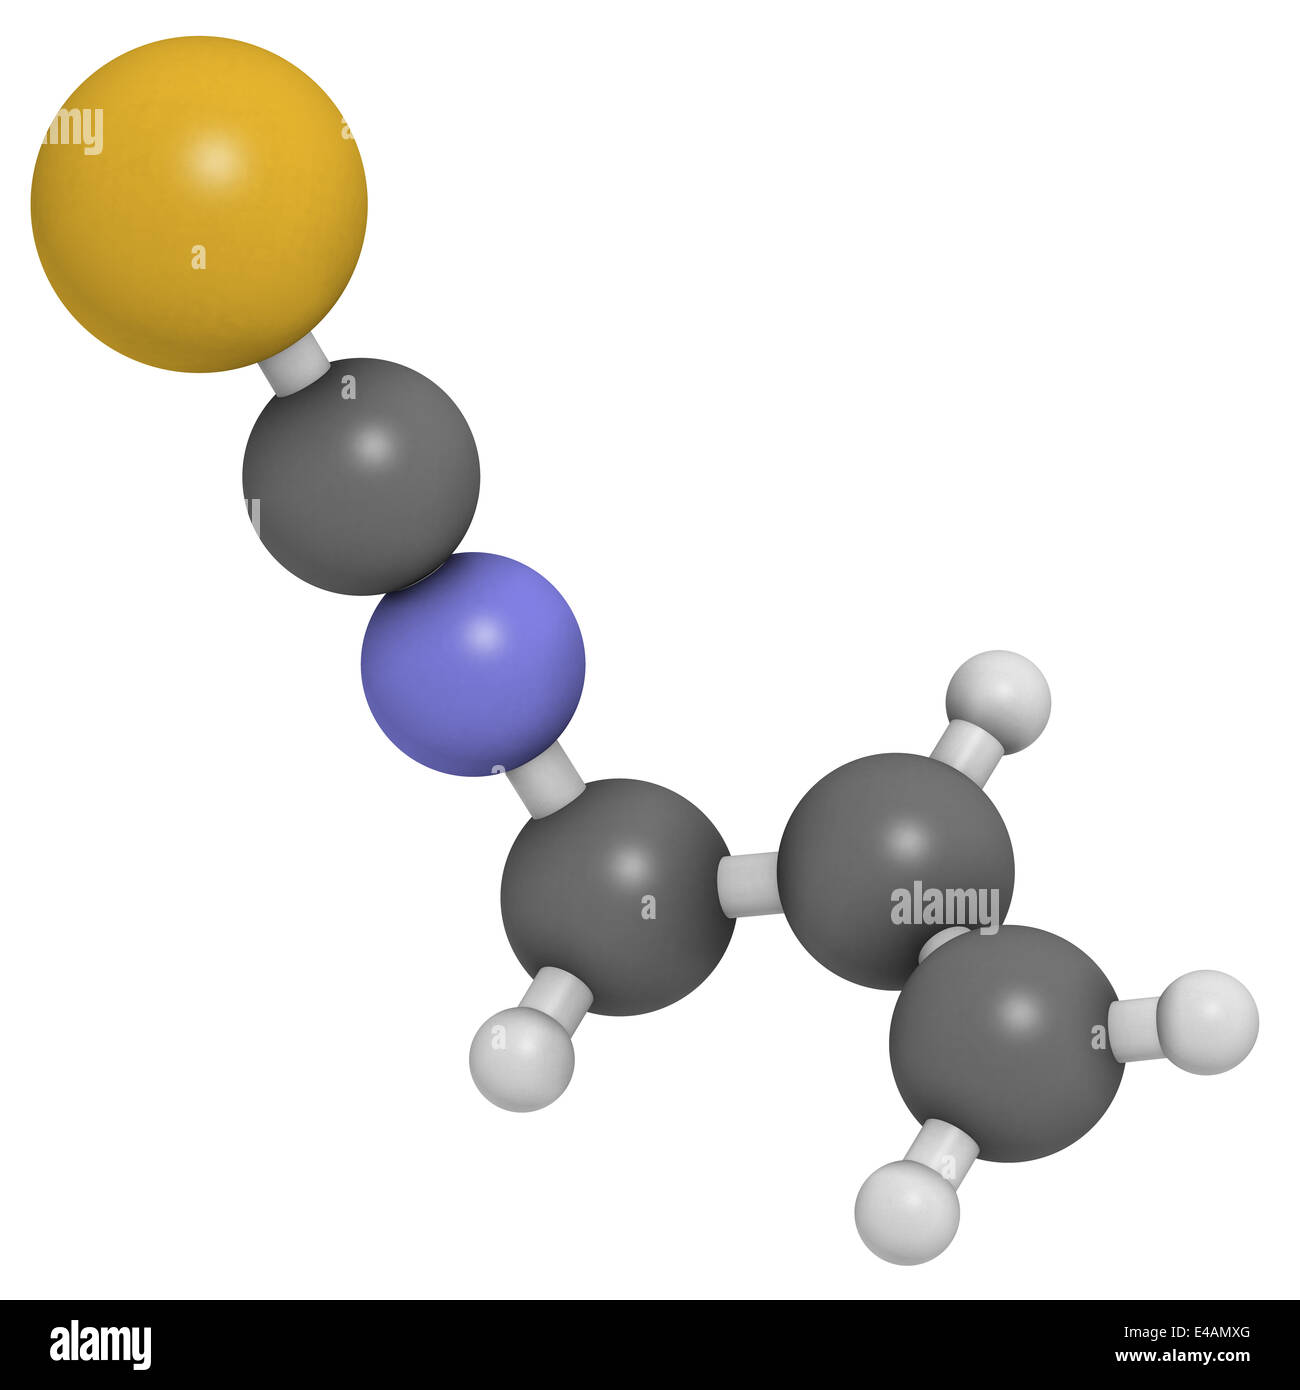 Allyl isothiocyanate mustard pungency molecule. Responsible for pungent taste of mustard, wasabi and radish. Stock Photo